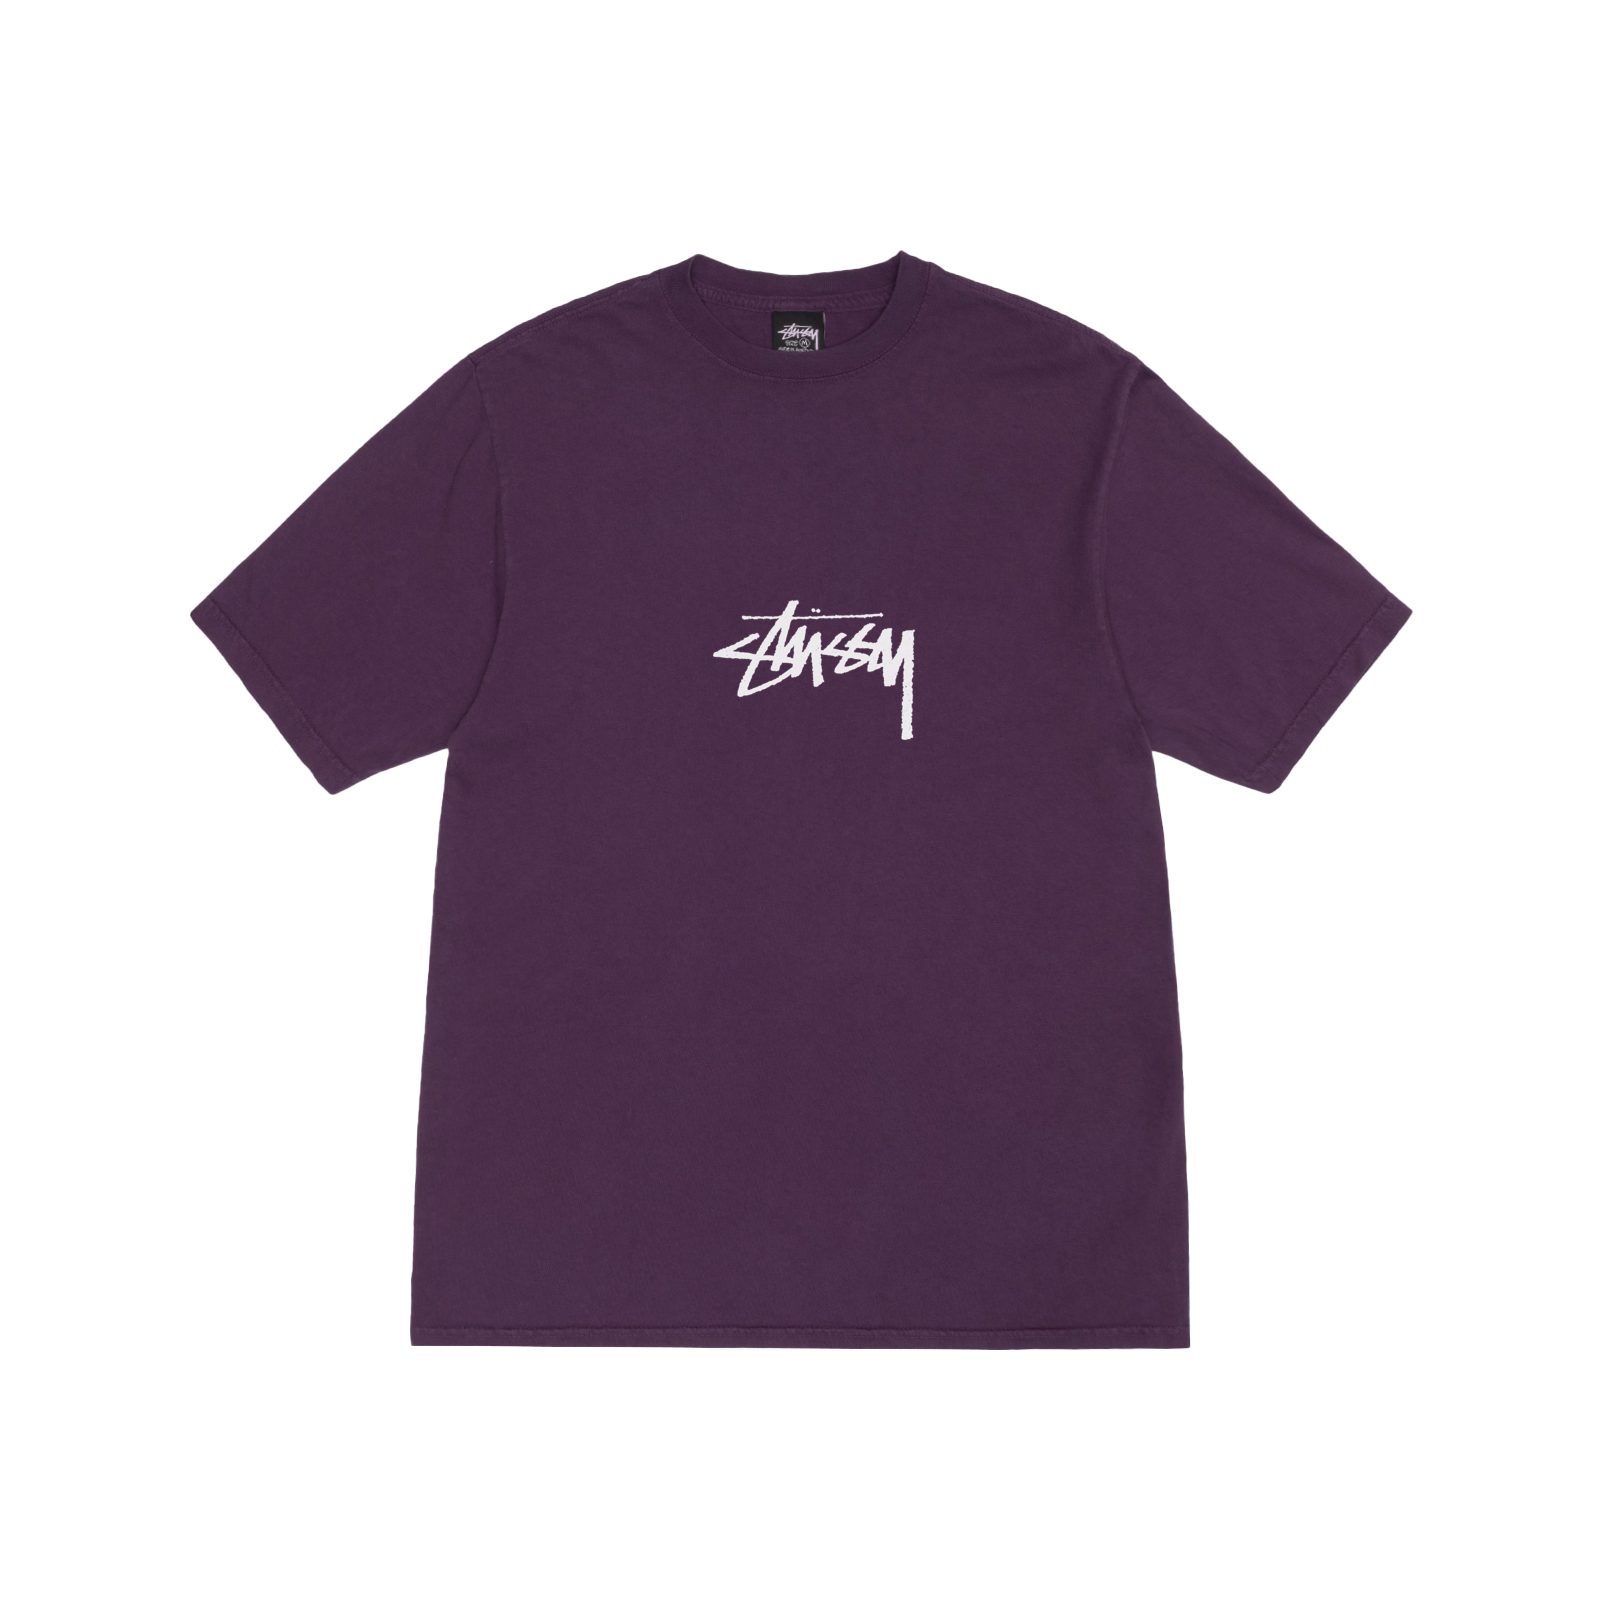 STUSSY - Small Stock Pig. Dyed Tee - (Purp) view 1